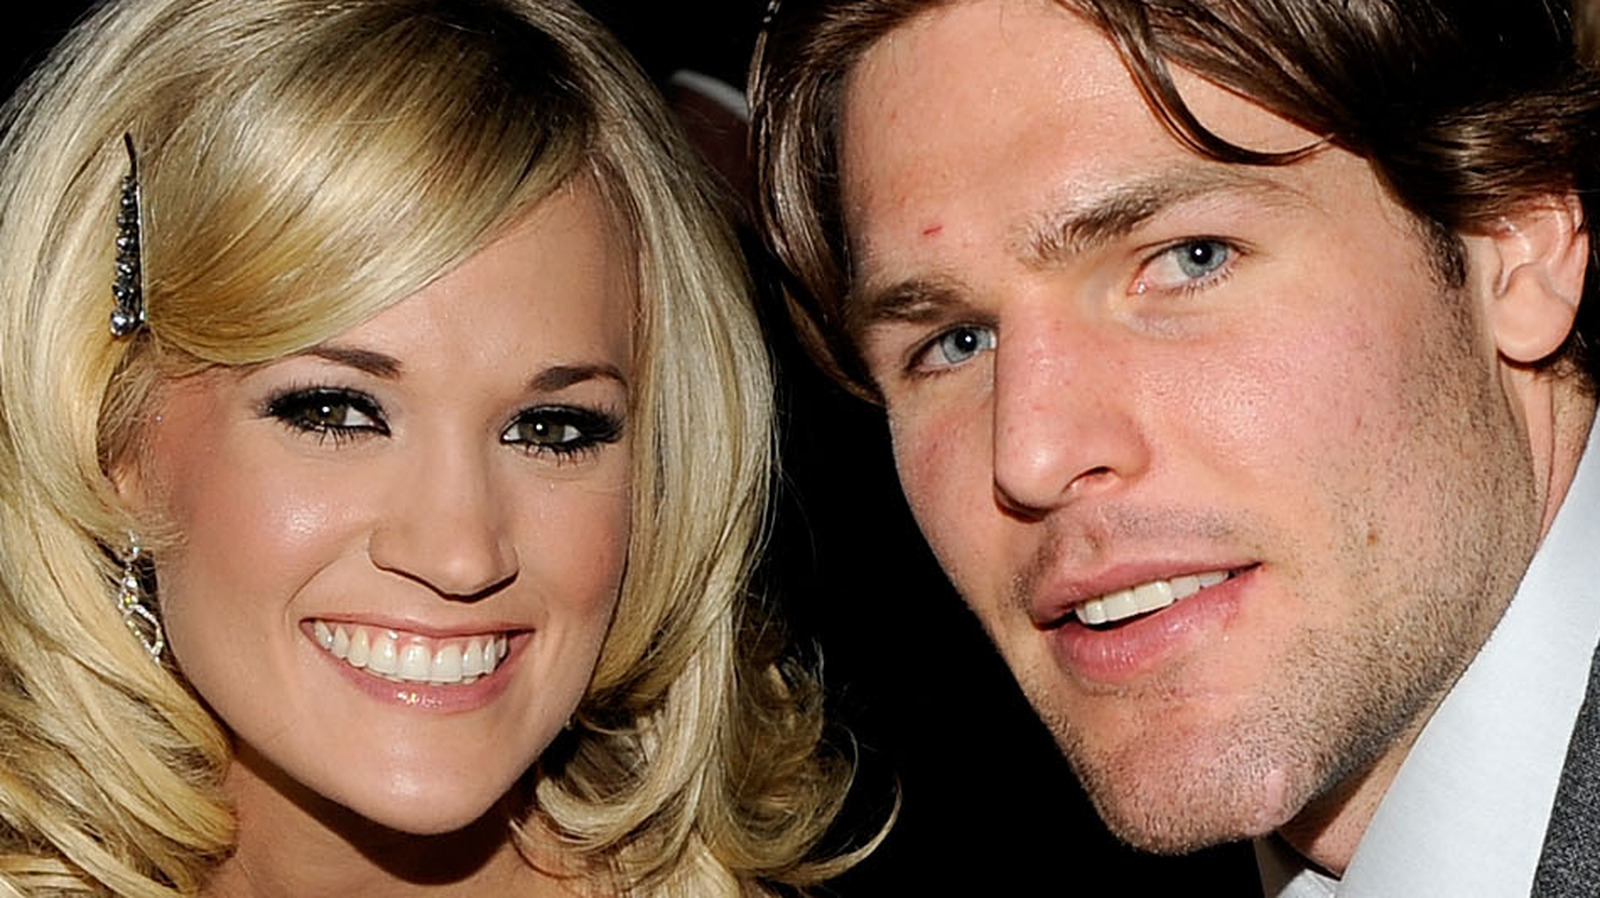 Carrie Underwood, Mike Fisher say their faith helps them overcome their  differences: 'It gives us a center ground